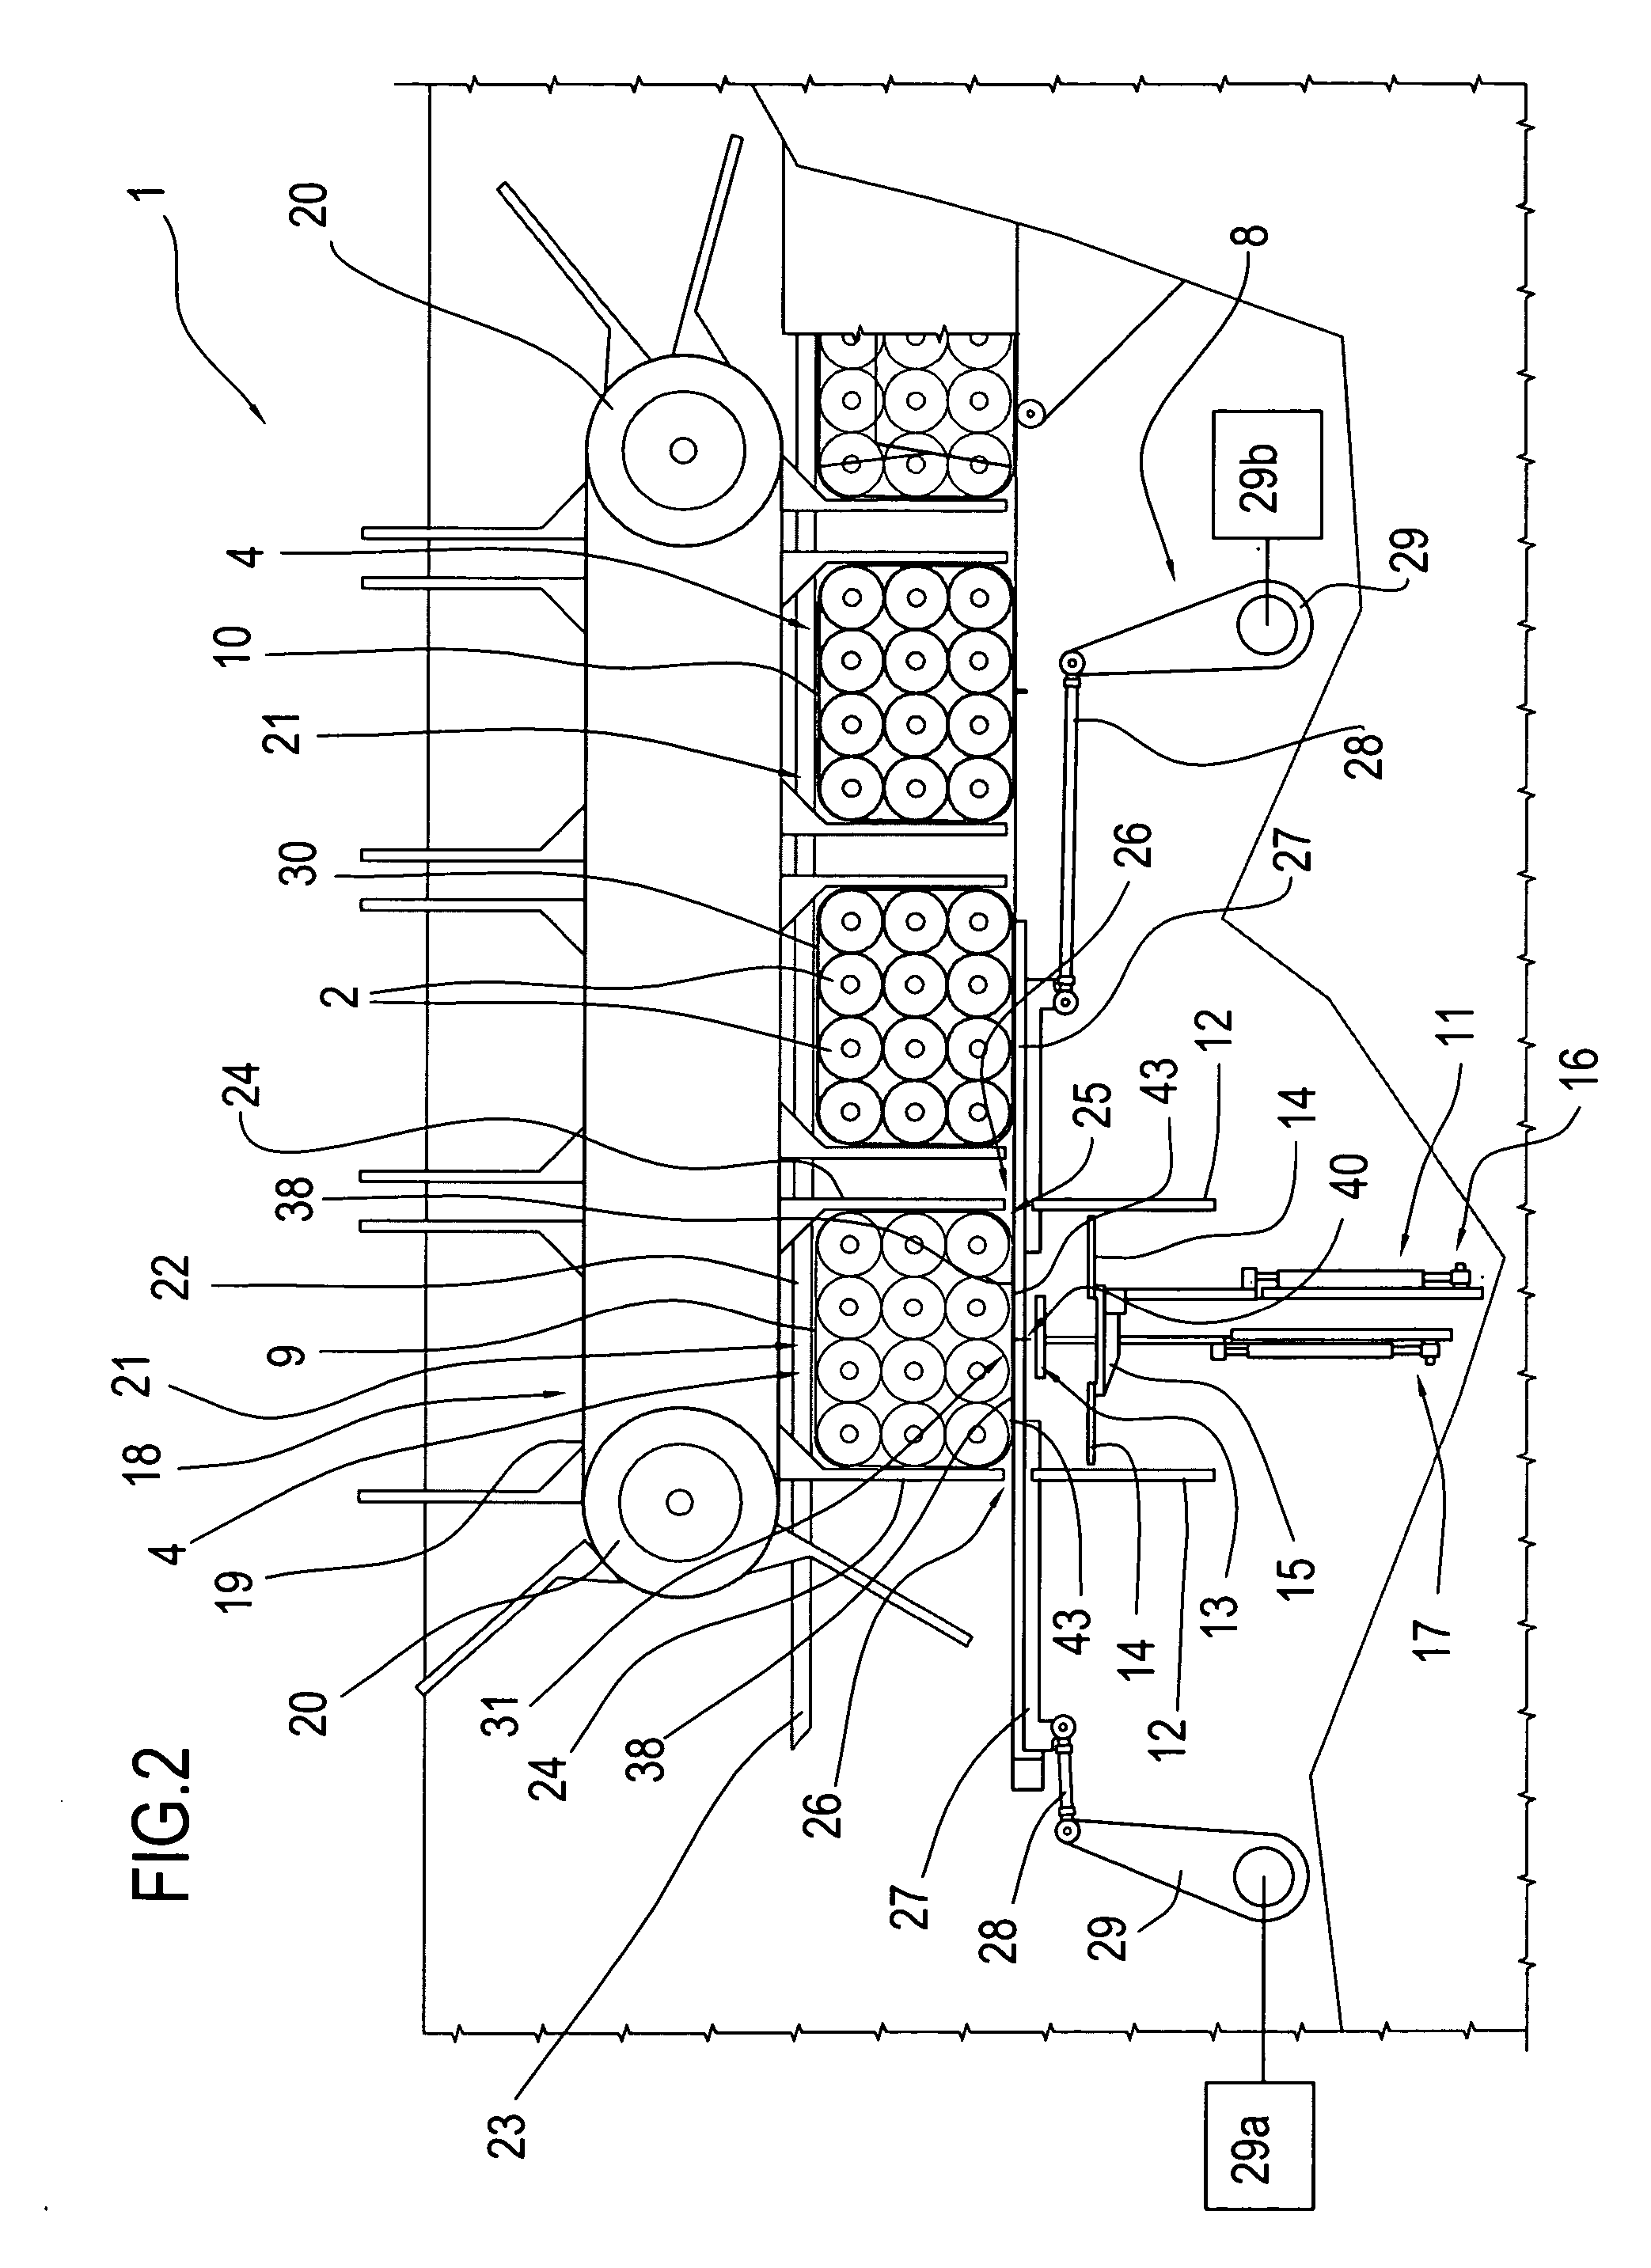 Method and system for packaging rolls of products